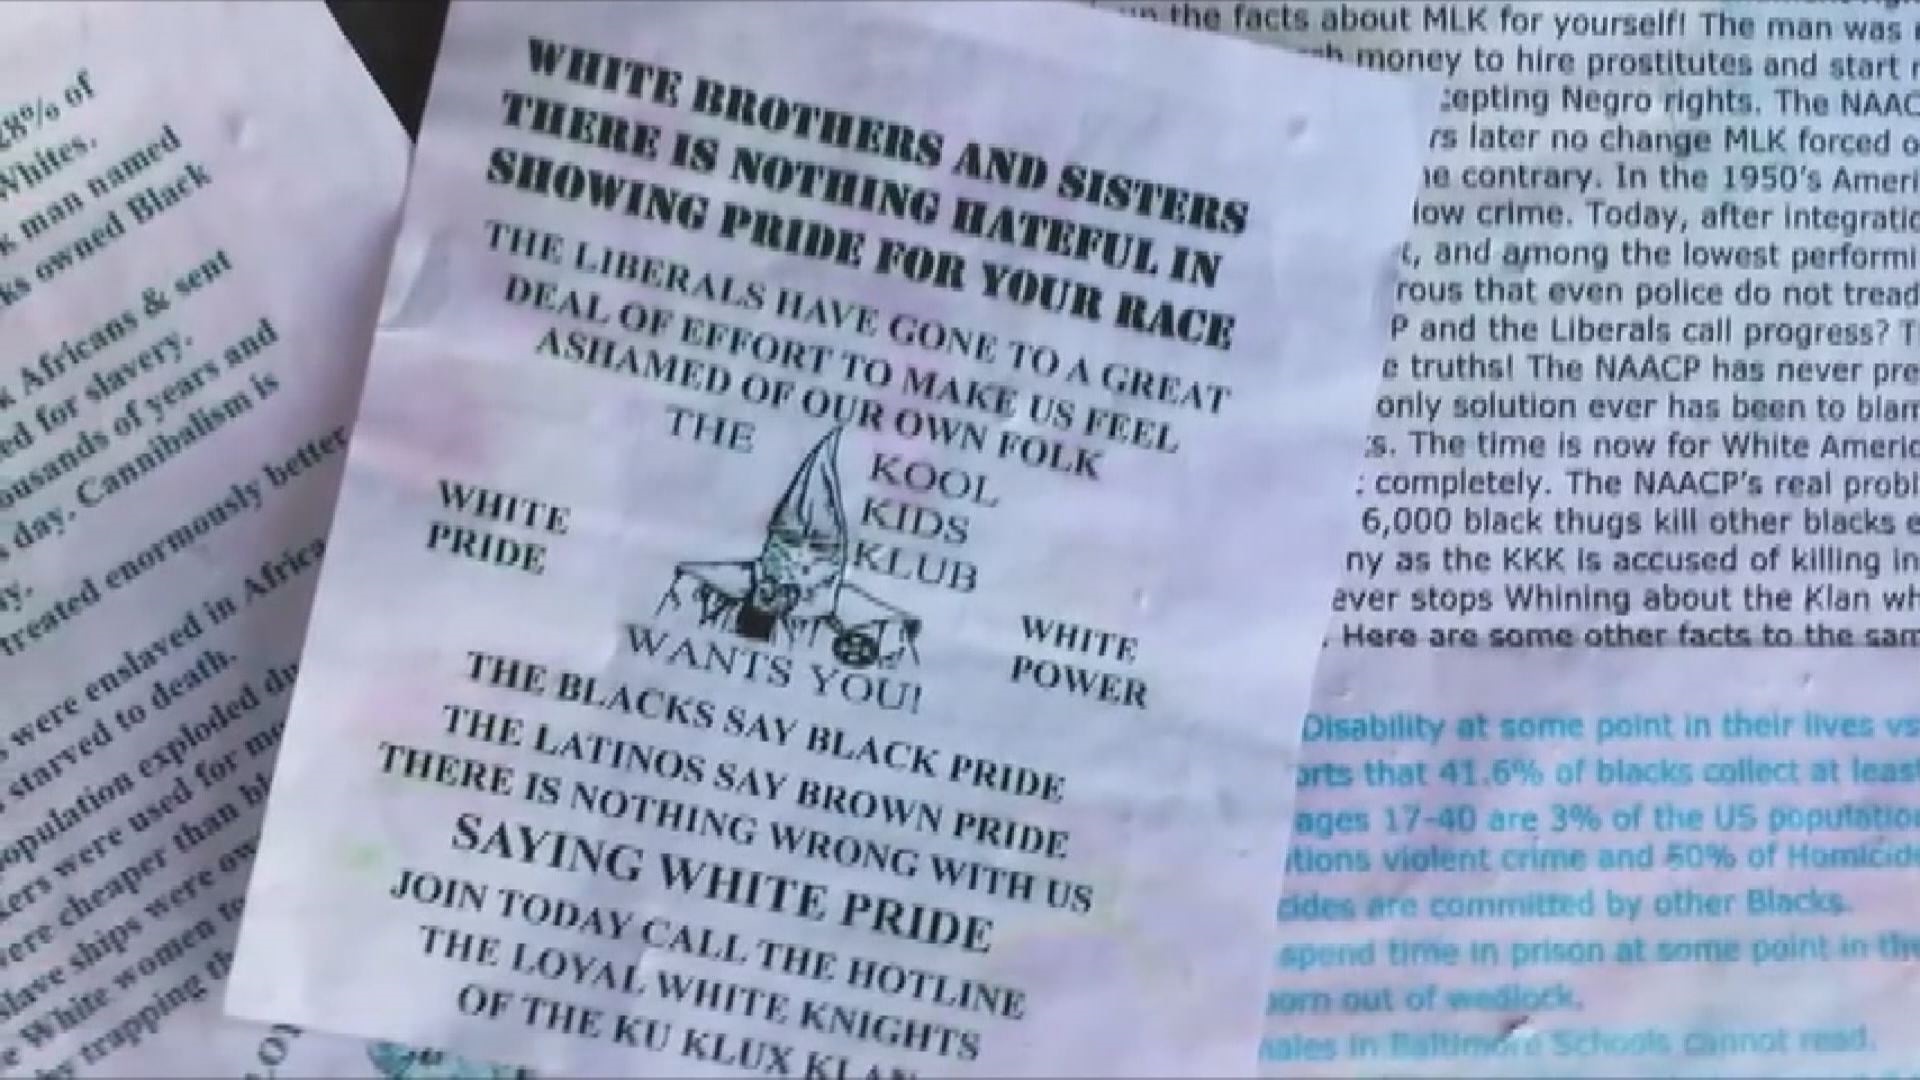 wusa9.com | New concerns over KKK fliers in Loudoun County and Leesburg1920 x 1080